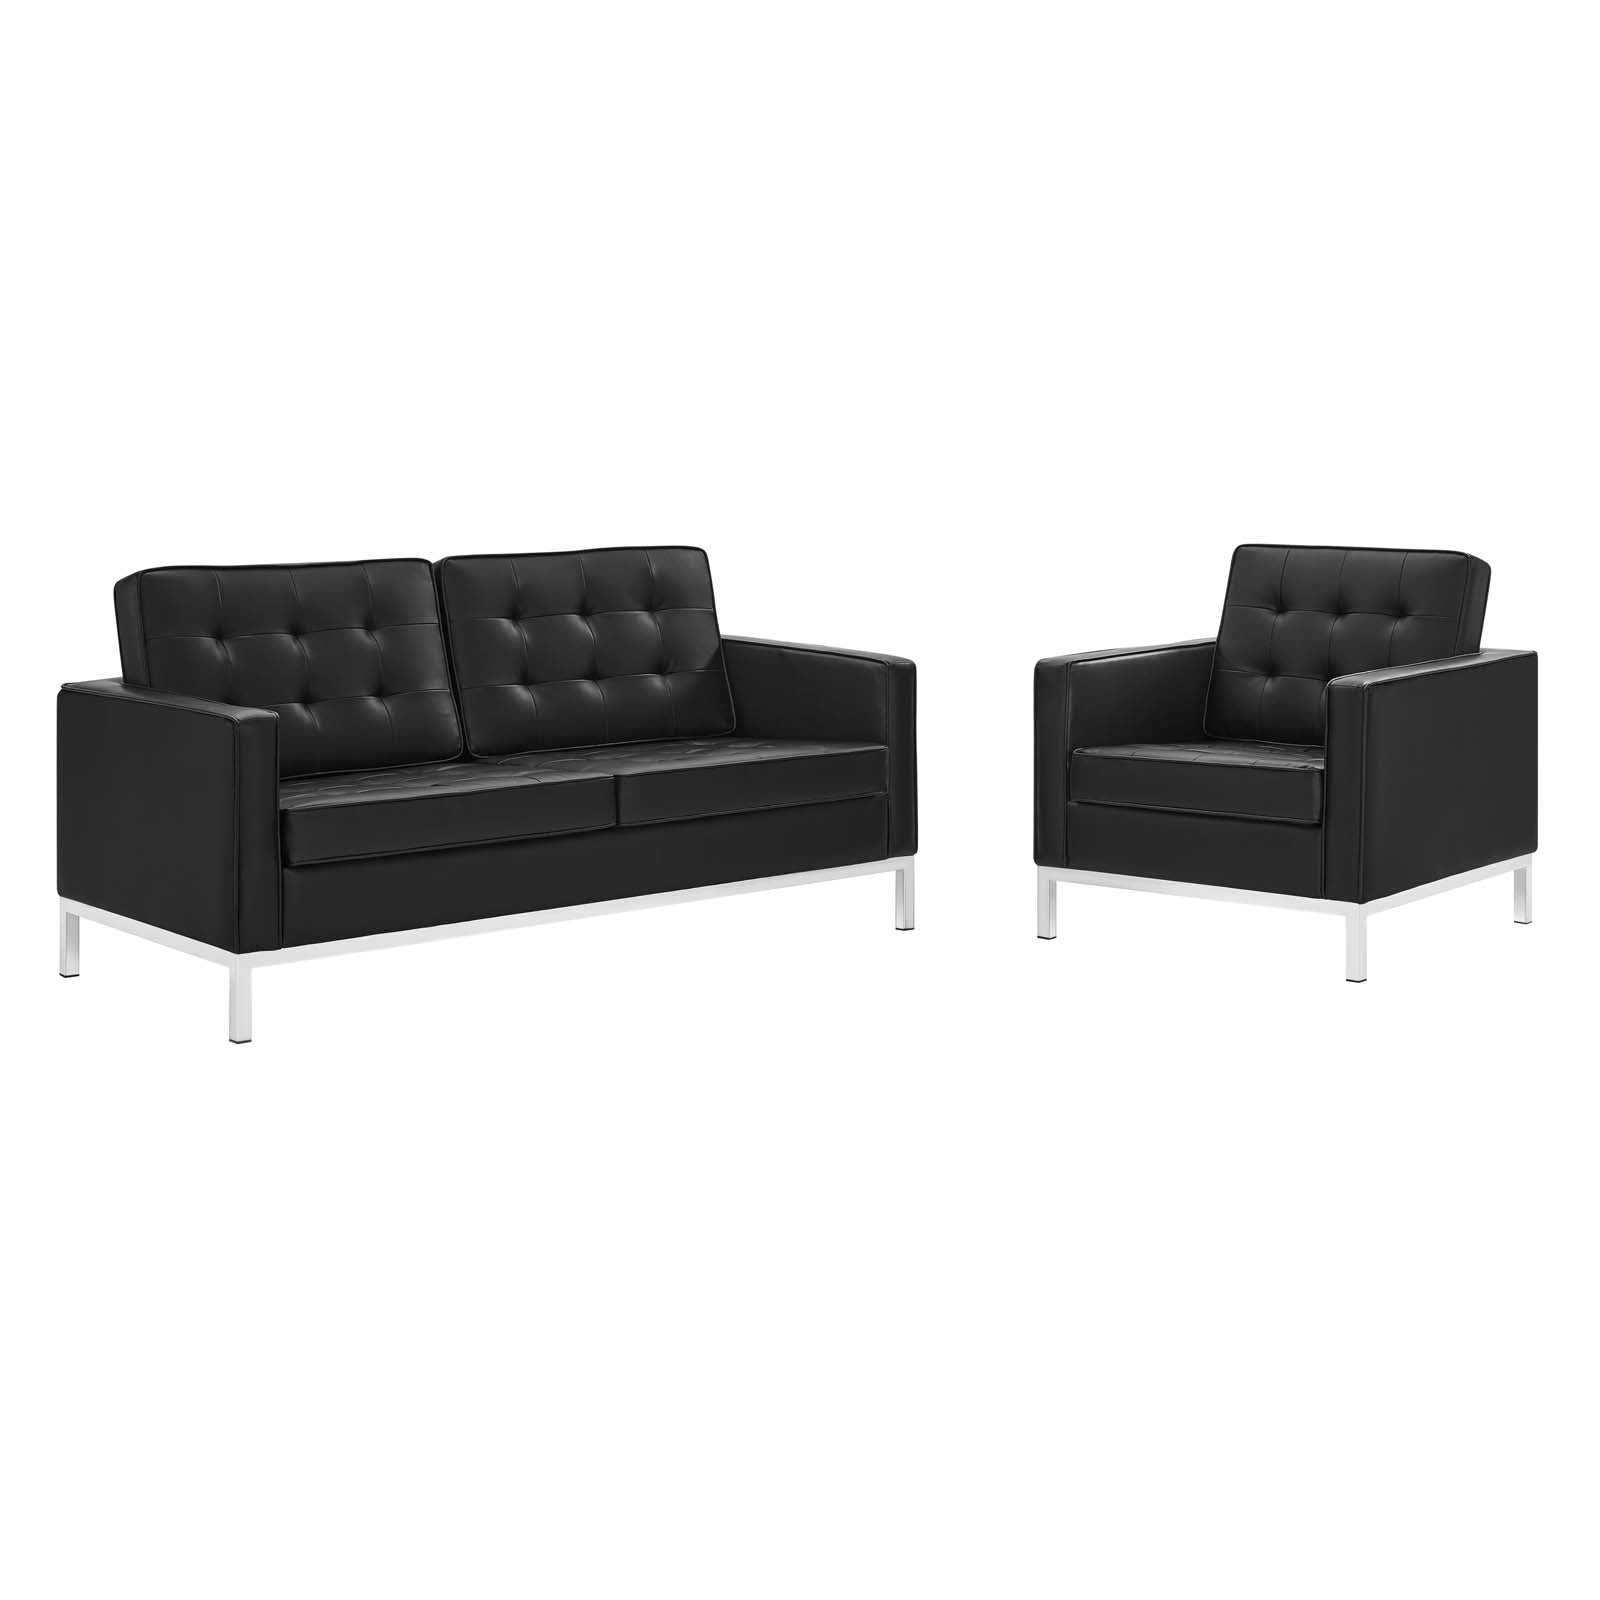 Modway Sofas & Couches - Loft-Tufted-Upholstered-Faux-Leather-Loveseat-and-Armchair-Set-Silver-Black